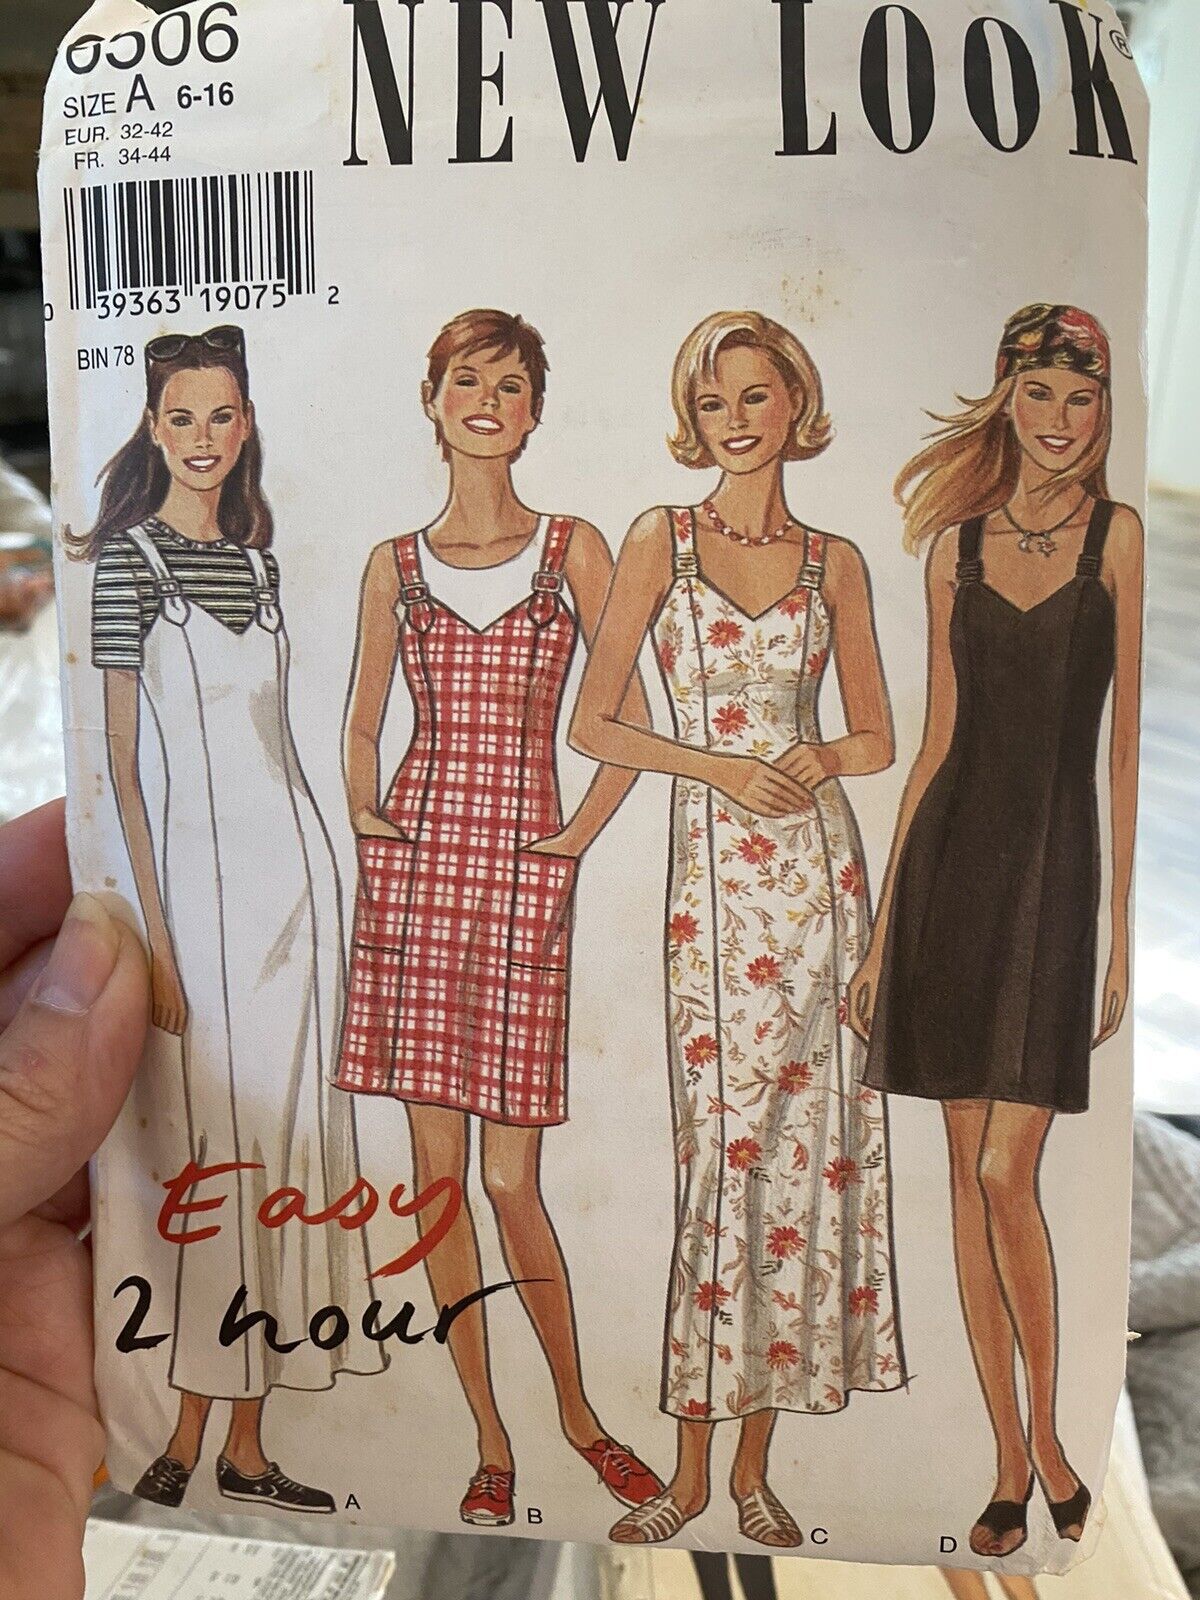 Vintage New Look Sewing Pattern 6506 Size 6-16 Uncut